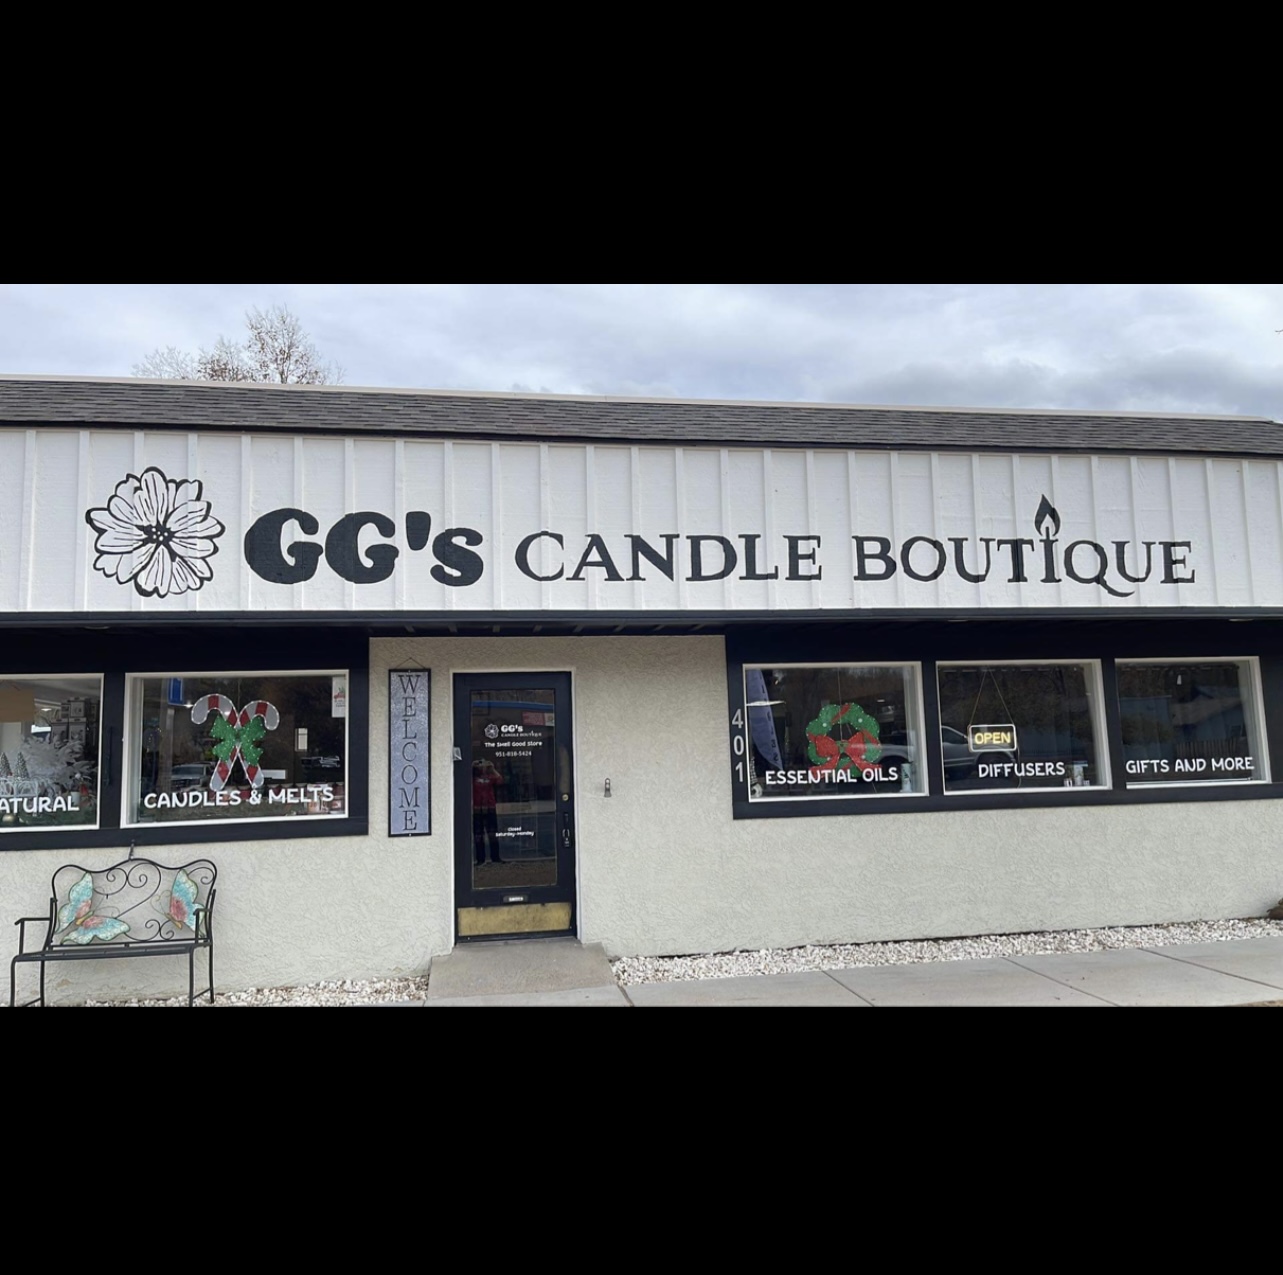 GG’s Candle Boutique